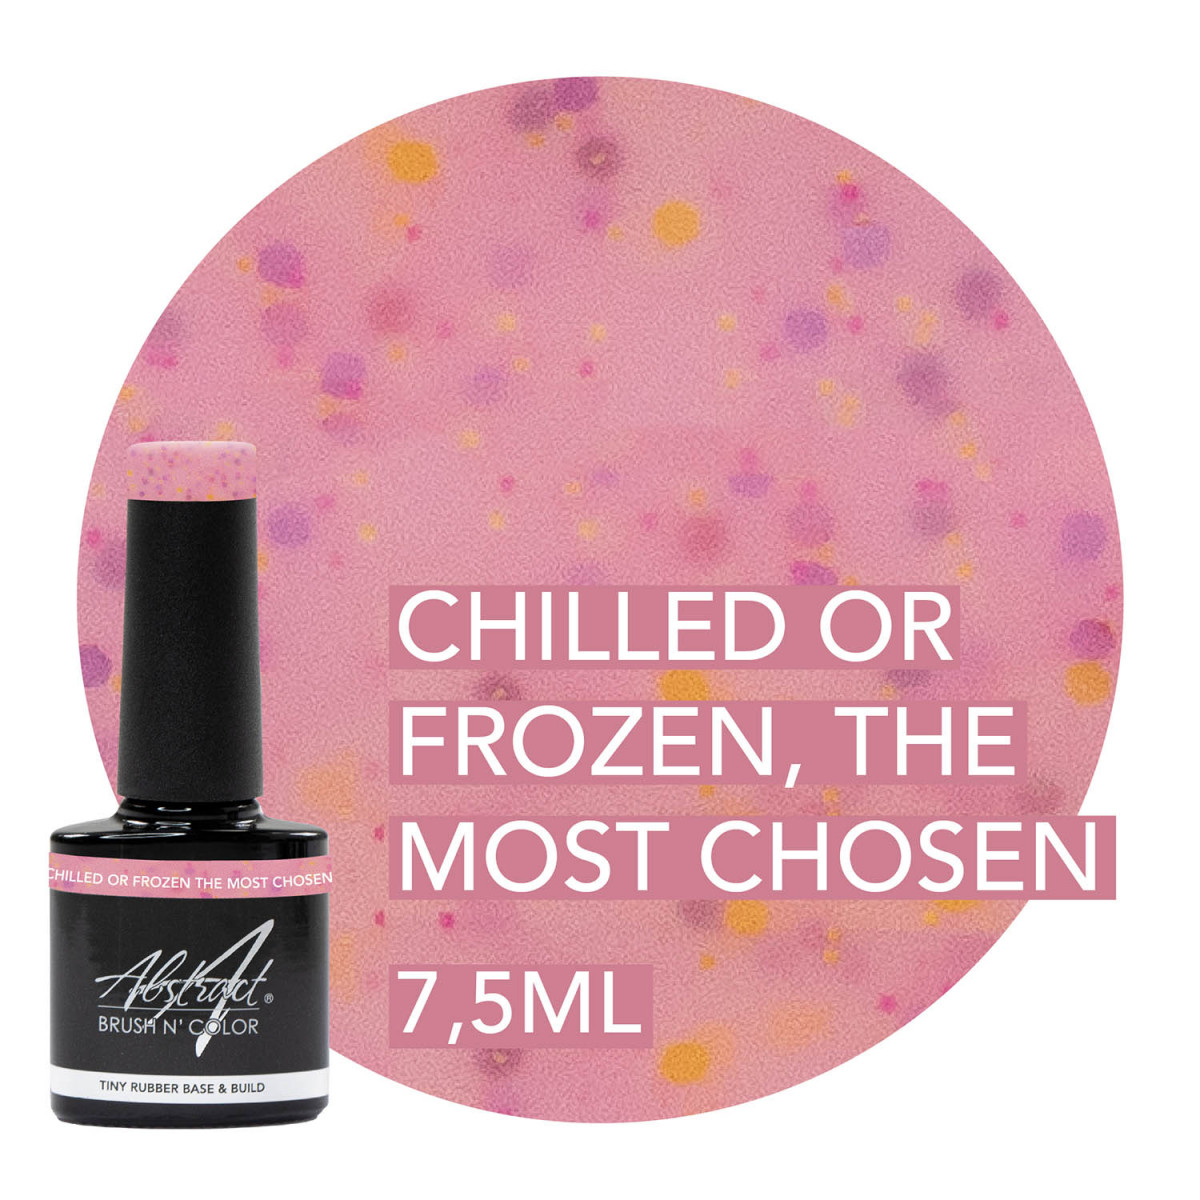 Chilled Or Frozen The Most Chosen - TINY Rubber Base & Build Gel Abstract